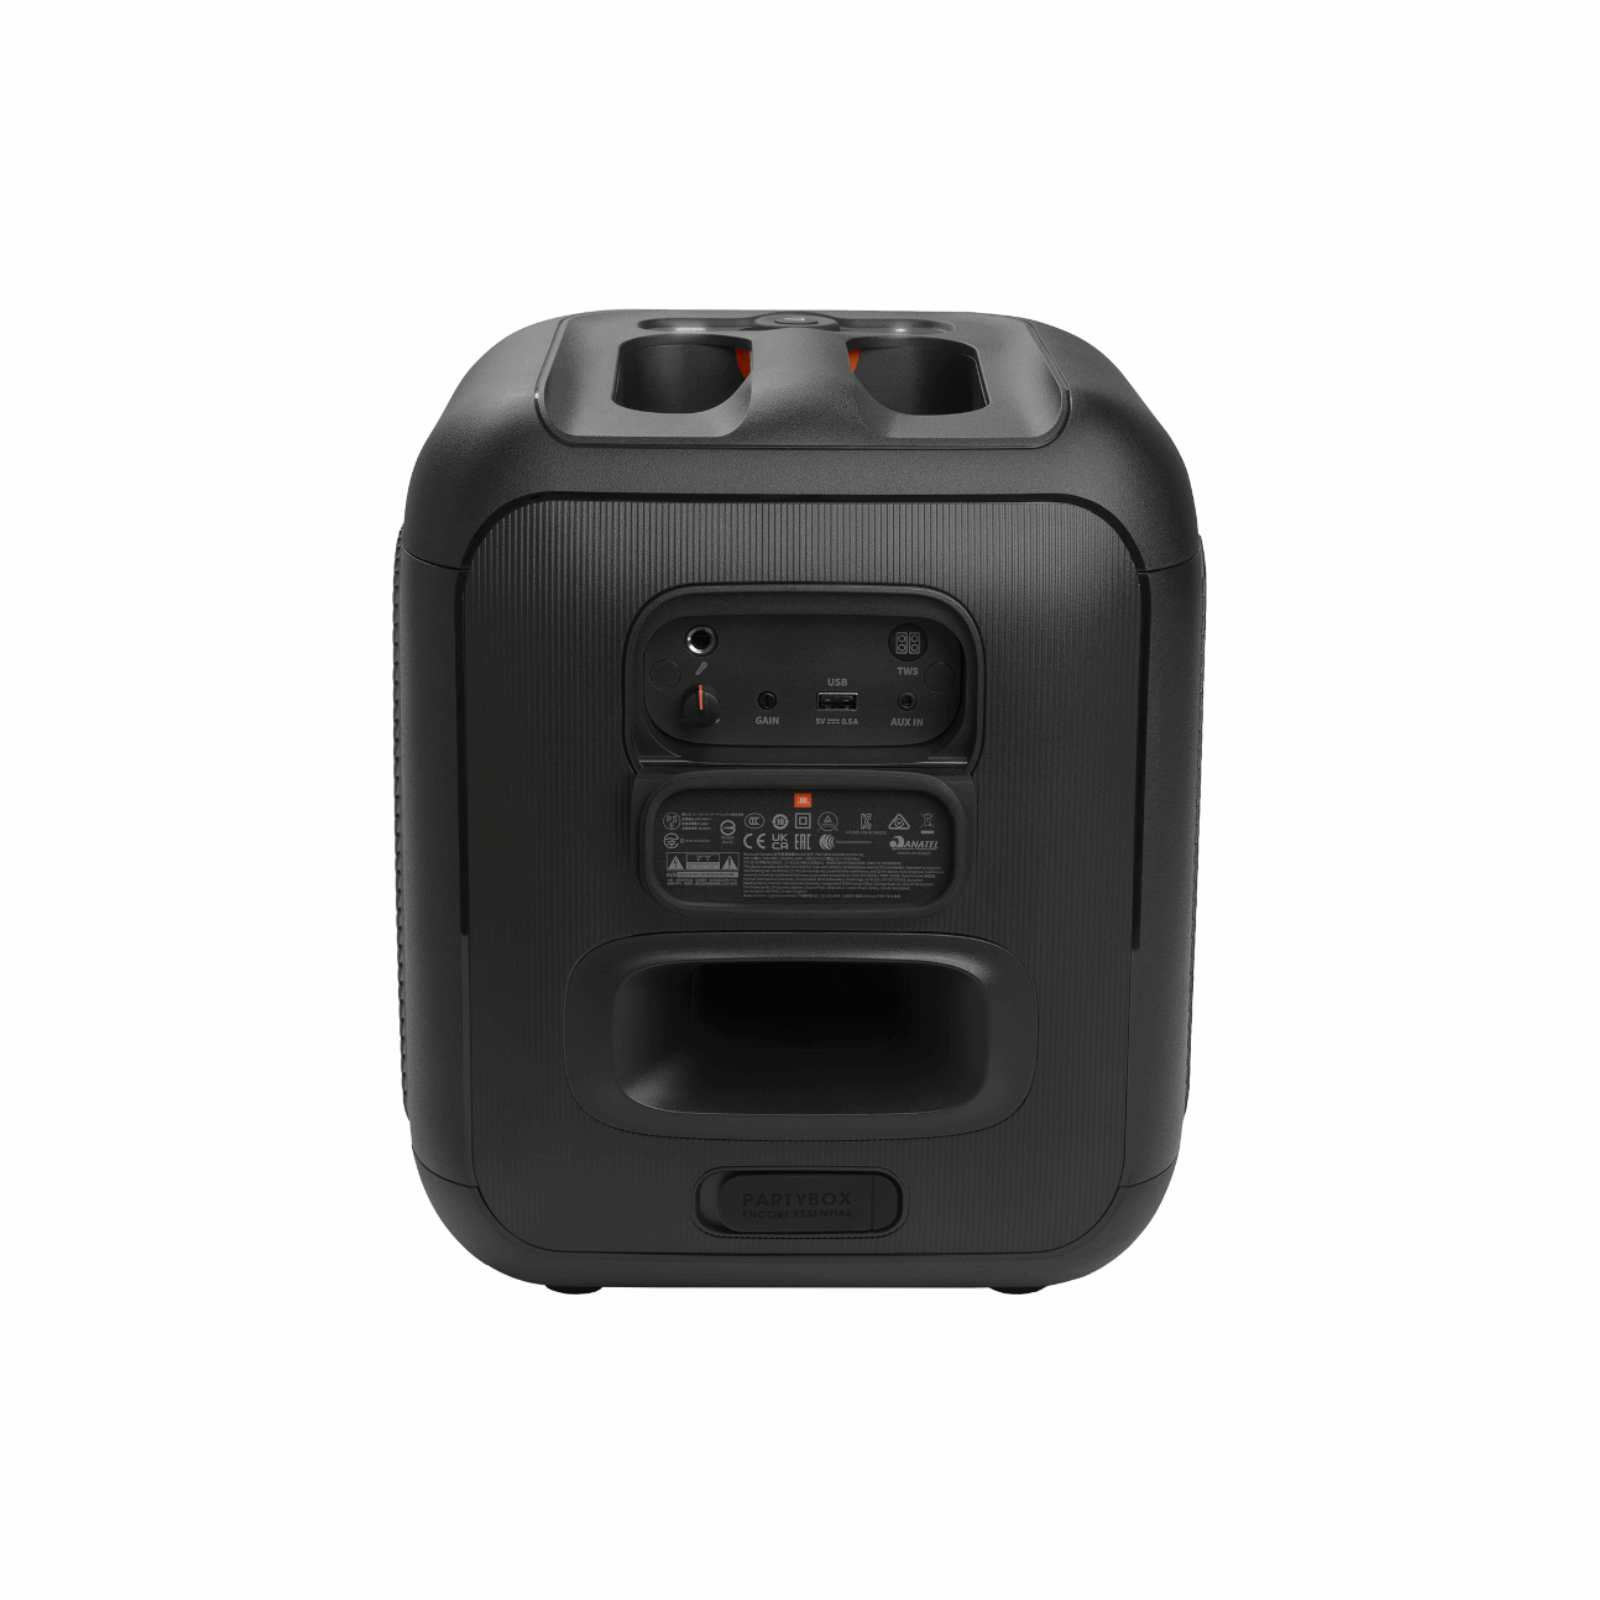 JBL PartyBox 110 - Portable Party Speaker with Built-in Lights, Powerful  Sound and deep bass, Black